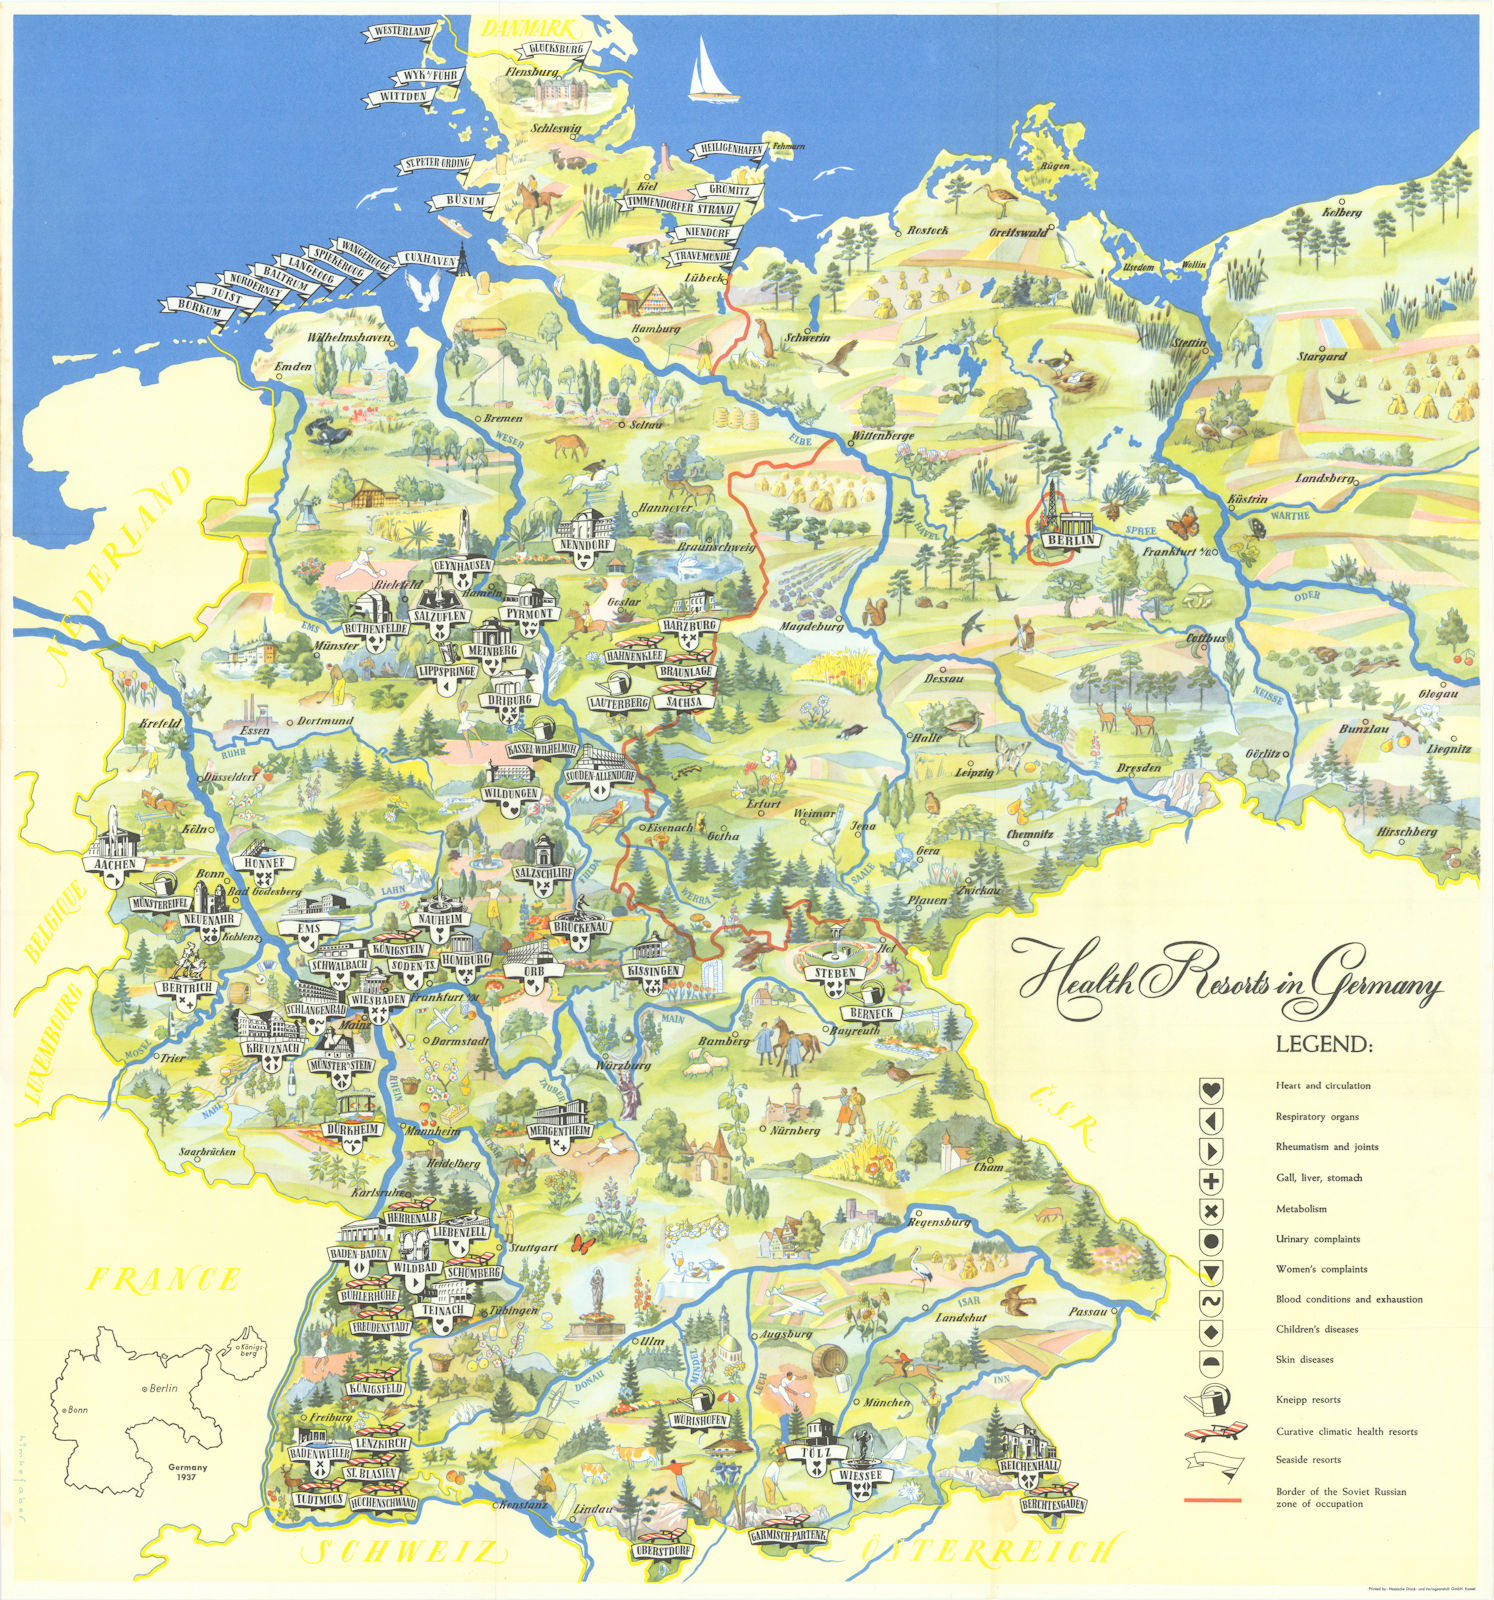 Health Resorts in Germany. Pictorial poster map. Himkefaber 1958 old